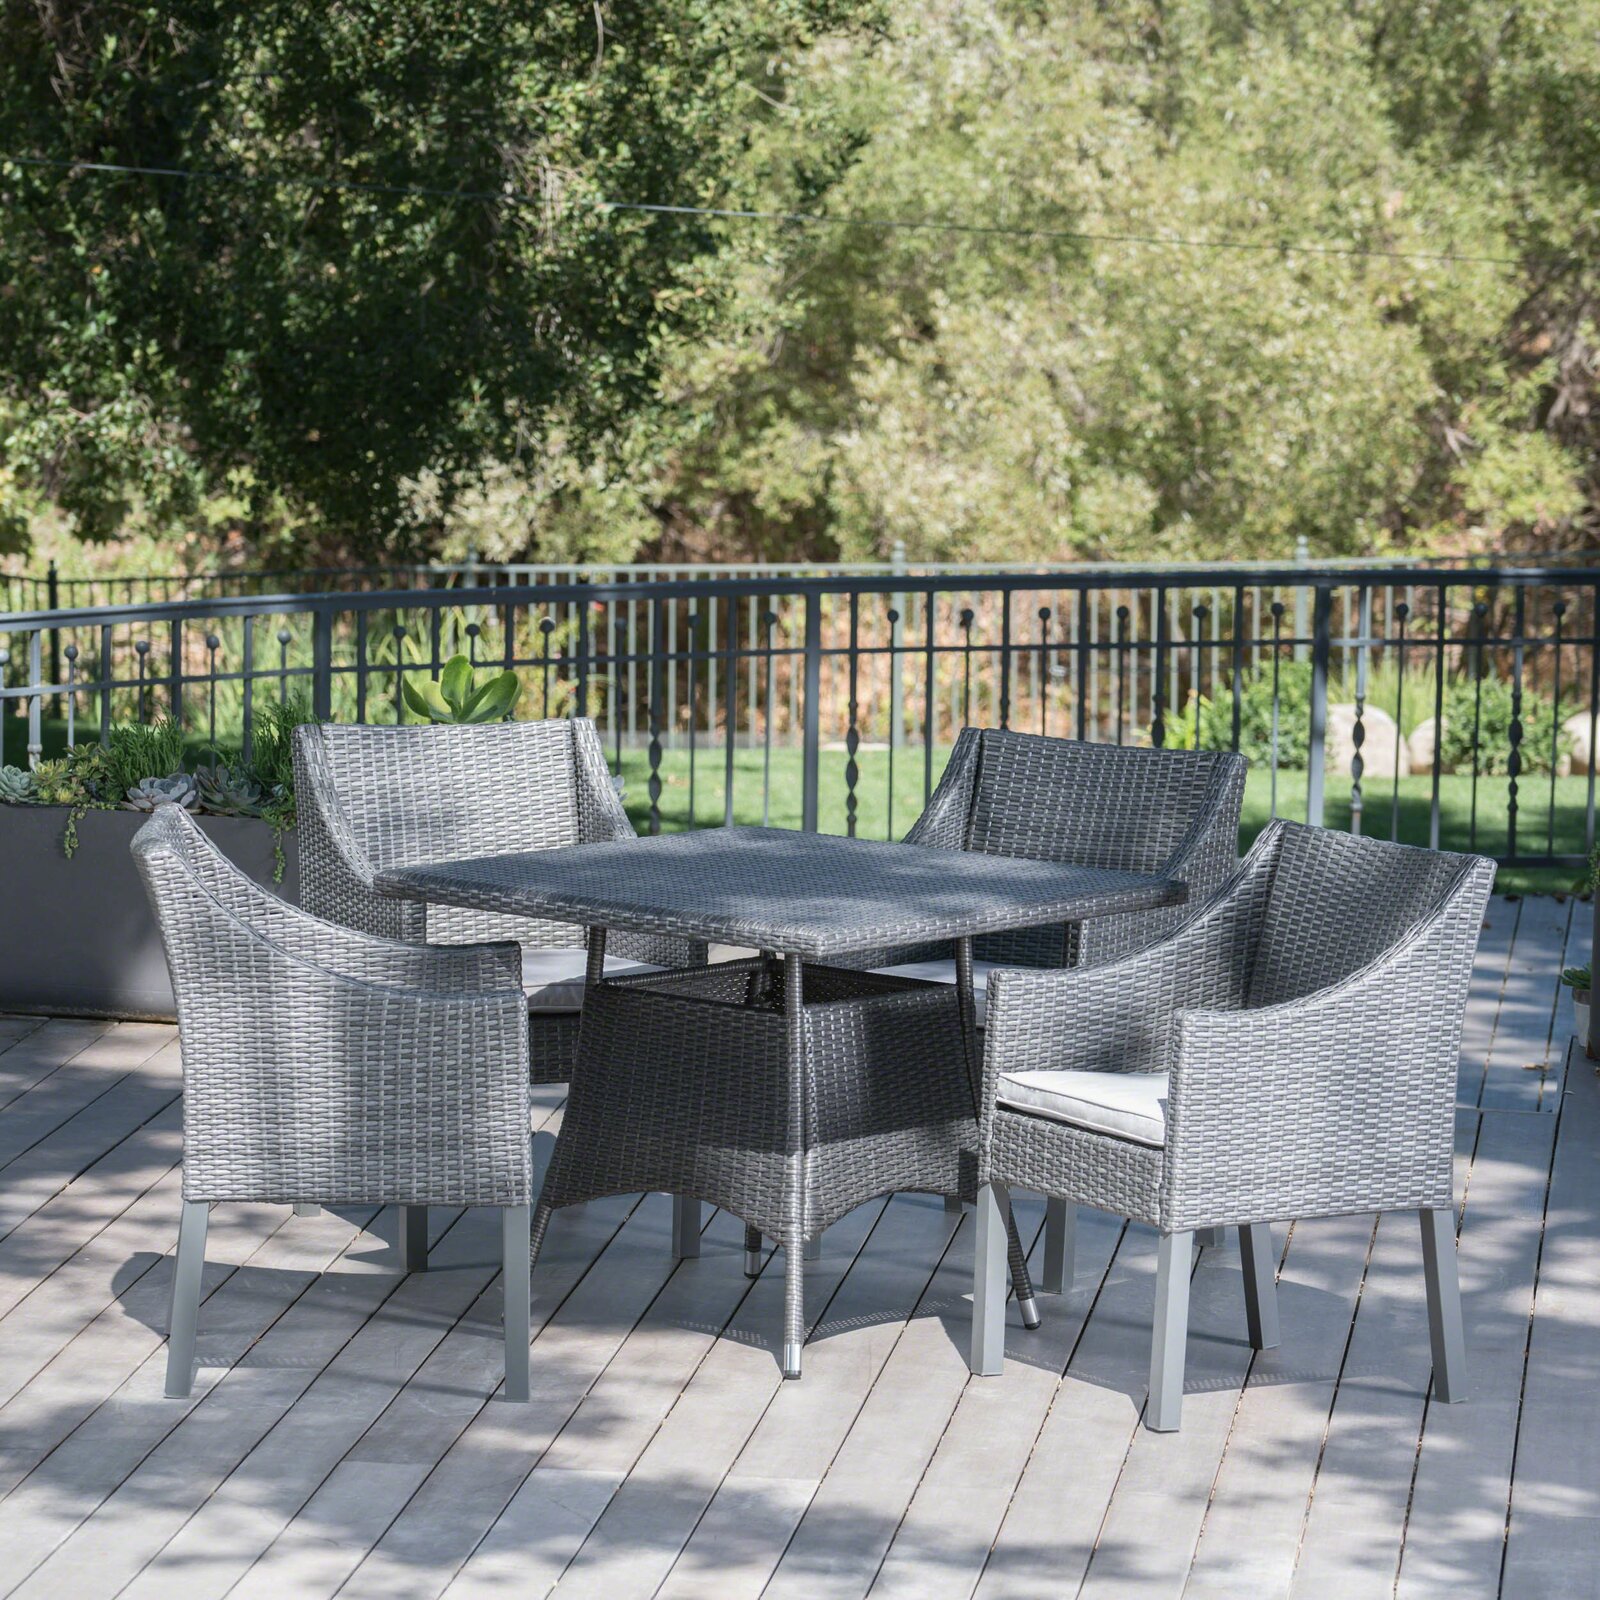 Ivy Bronx Arevalo Square 4 - Person Outdoor Dining Set